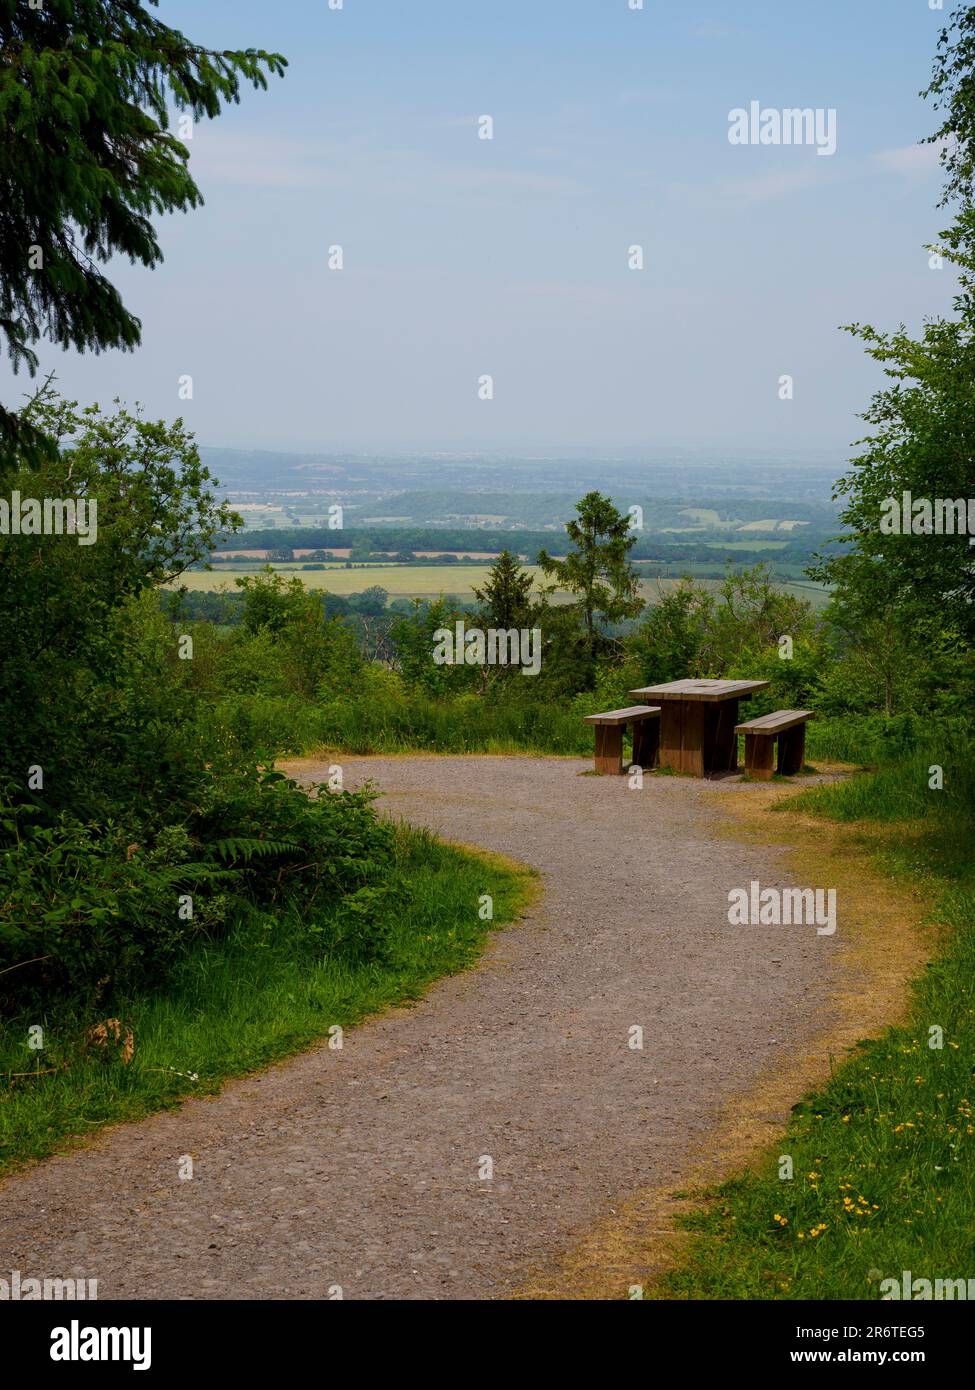 Picnic bench at the viewpoint on Staple hill the highest point on the Blackdown Hills, Somerset, UK Stock Photo